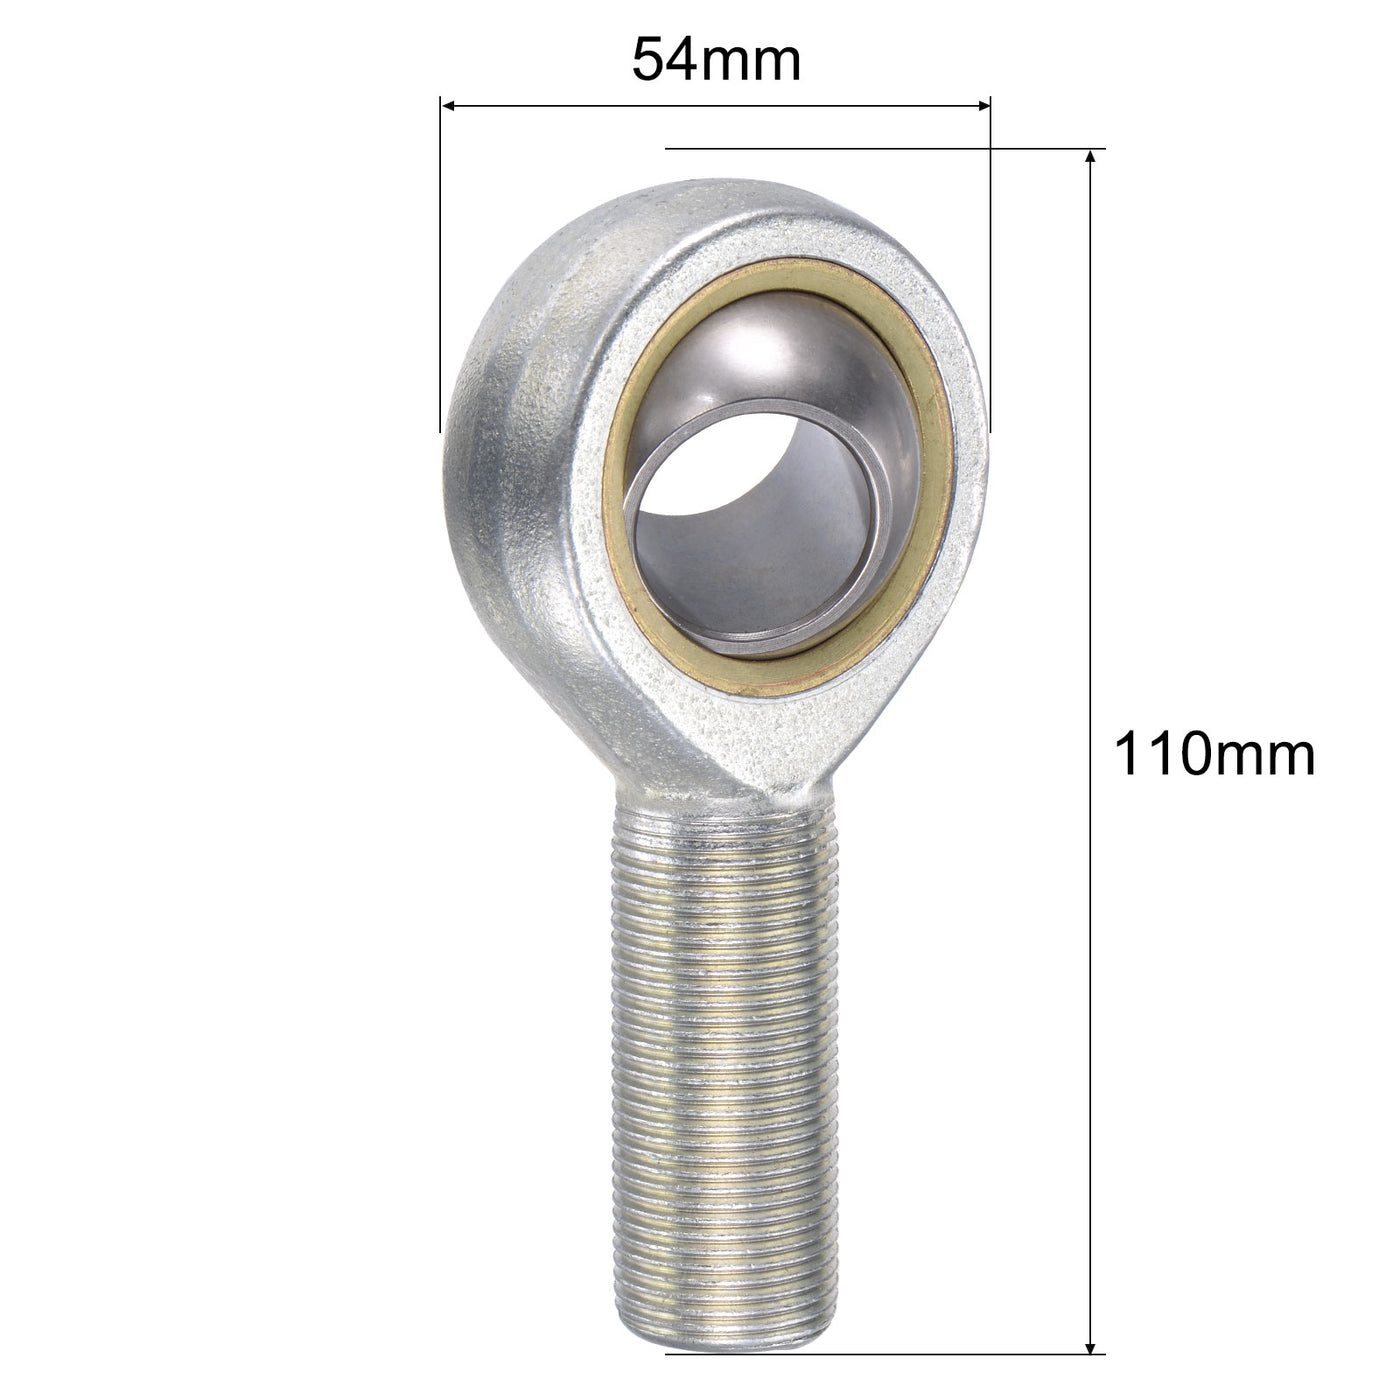 uxcell Uxcell SA22TK POSA22 Rod End Bearing 22mm Bore M22x1.5 Right Hand Male Thread